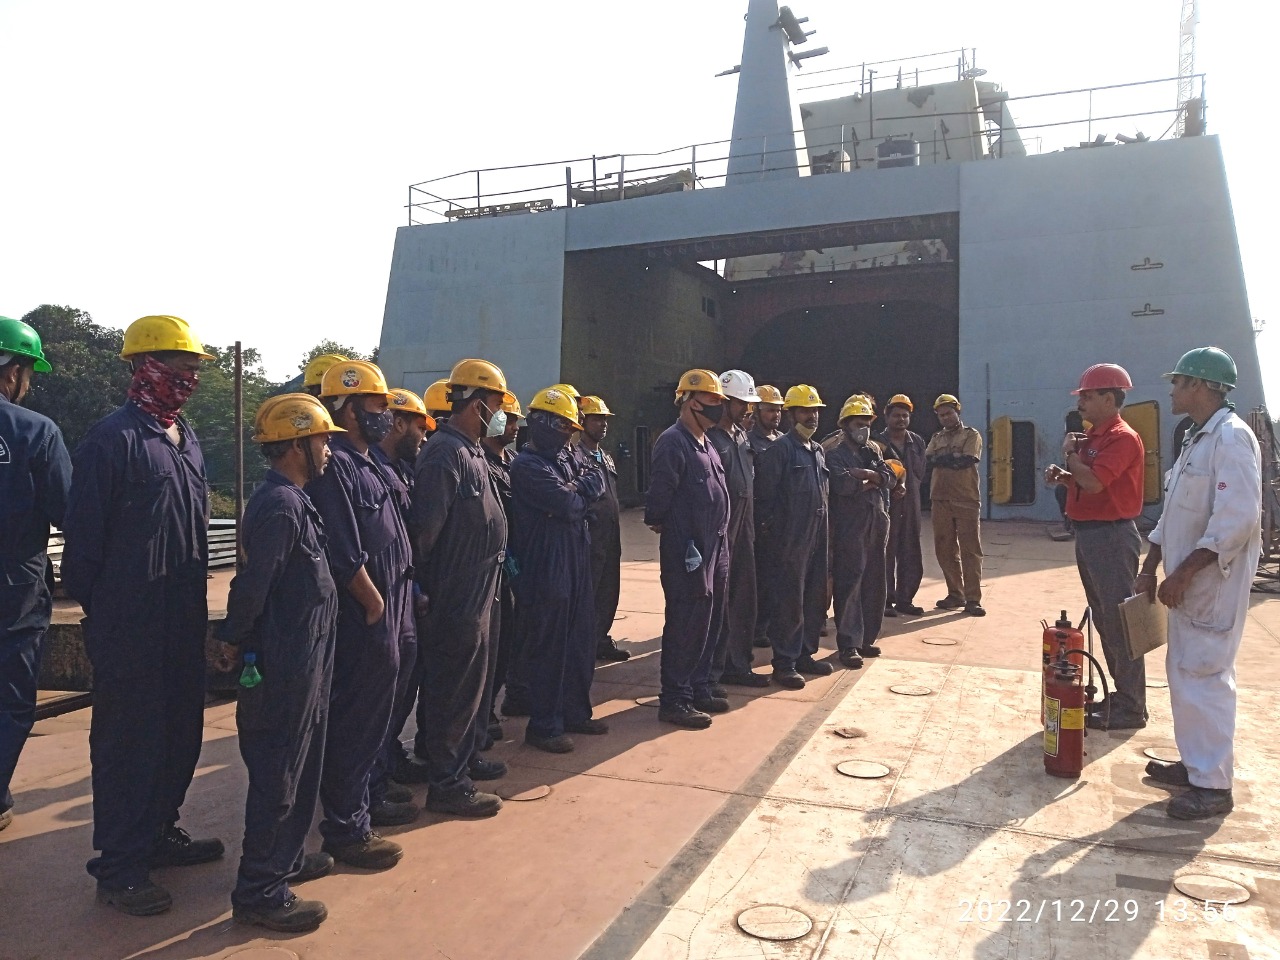 On board Fire & Safety awareness training Yard-3022 on 27 Dec 22